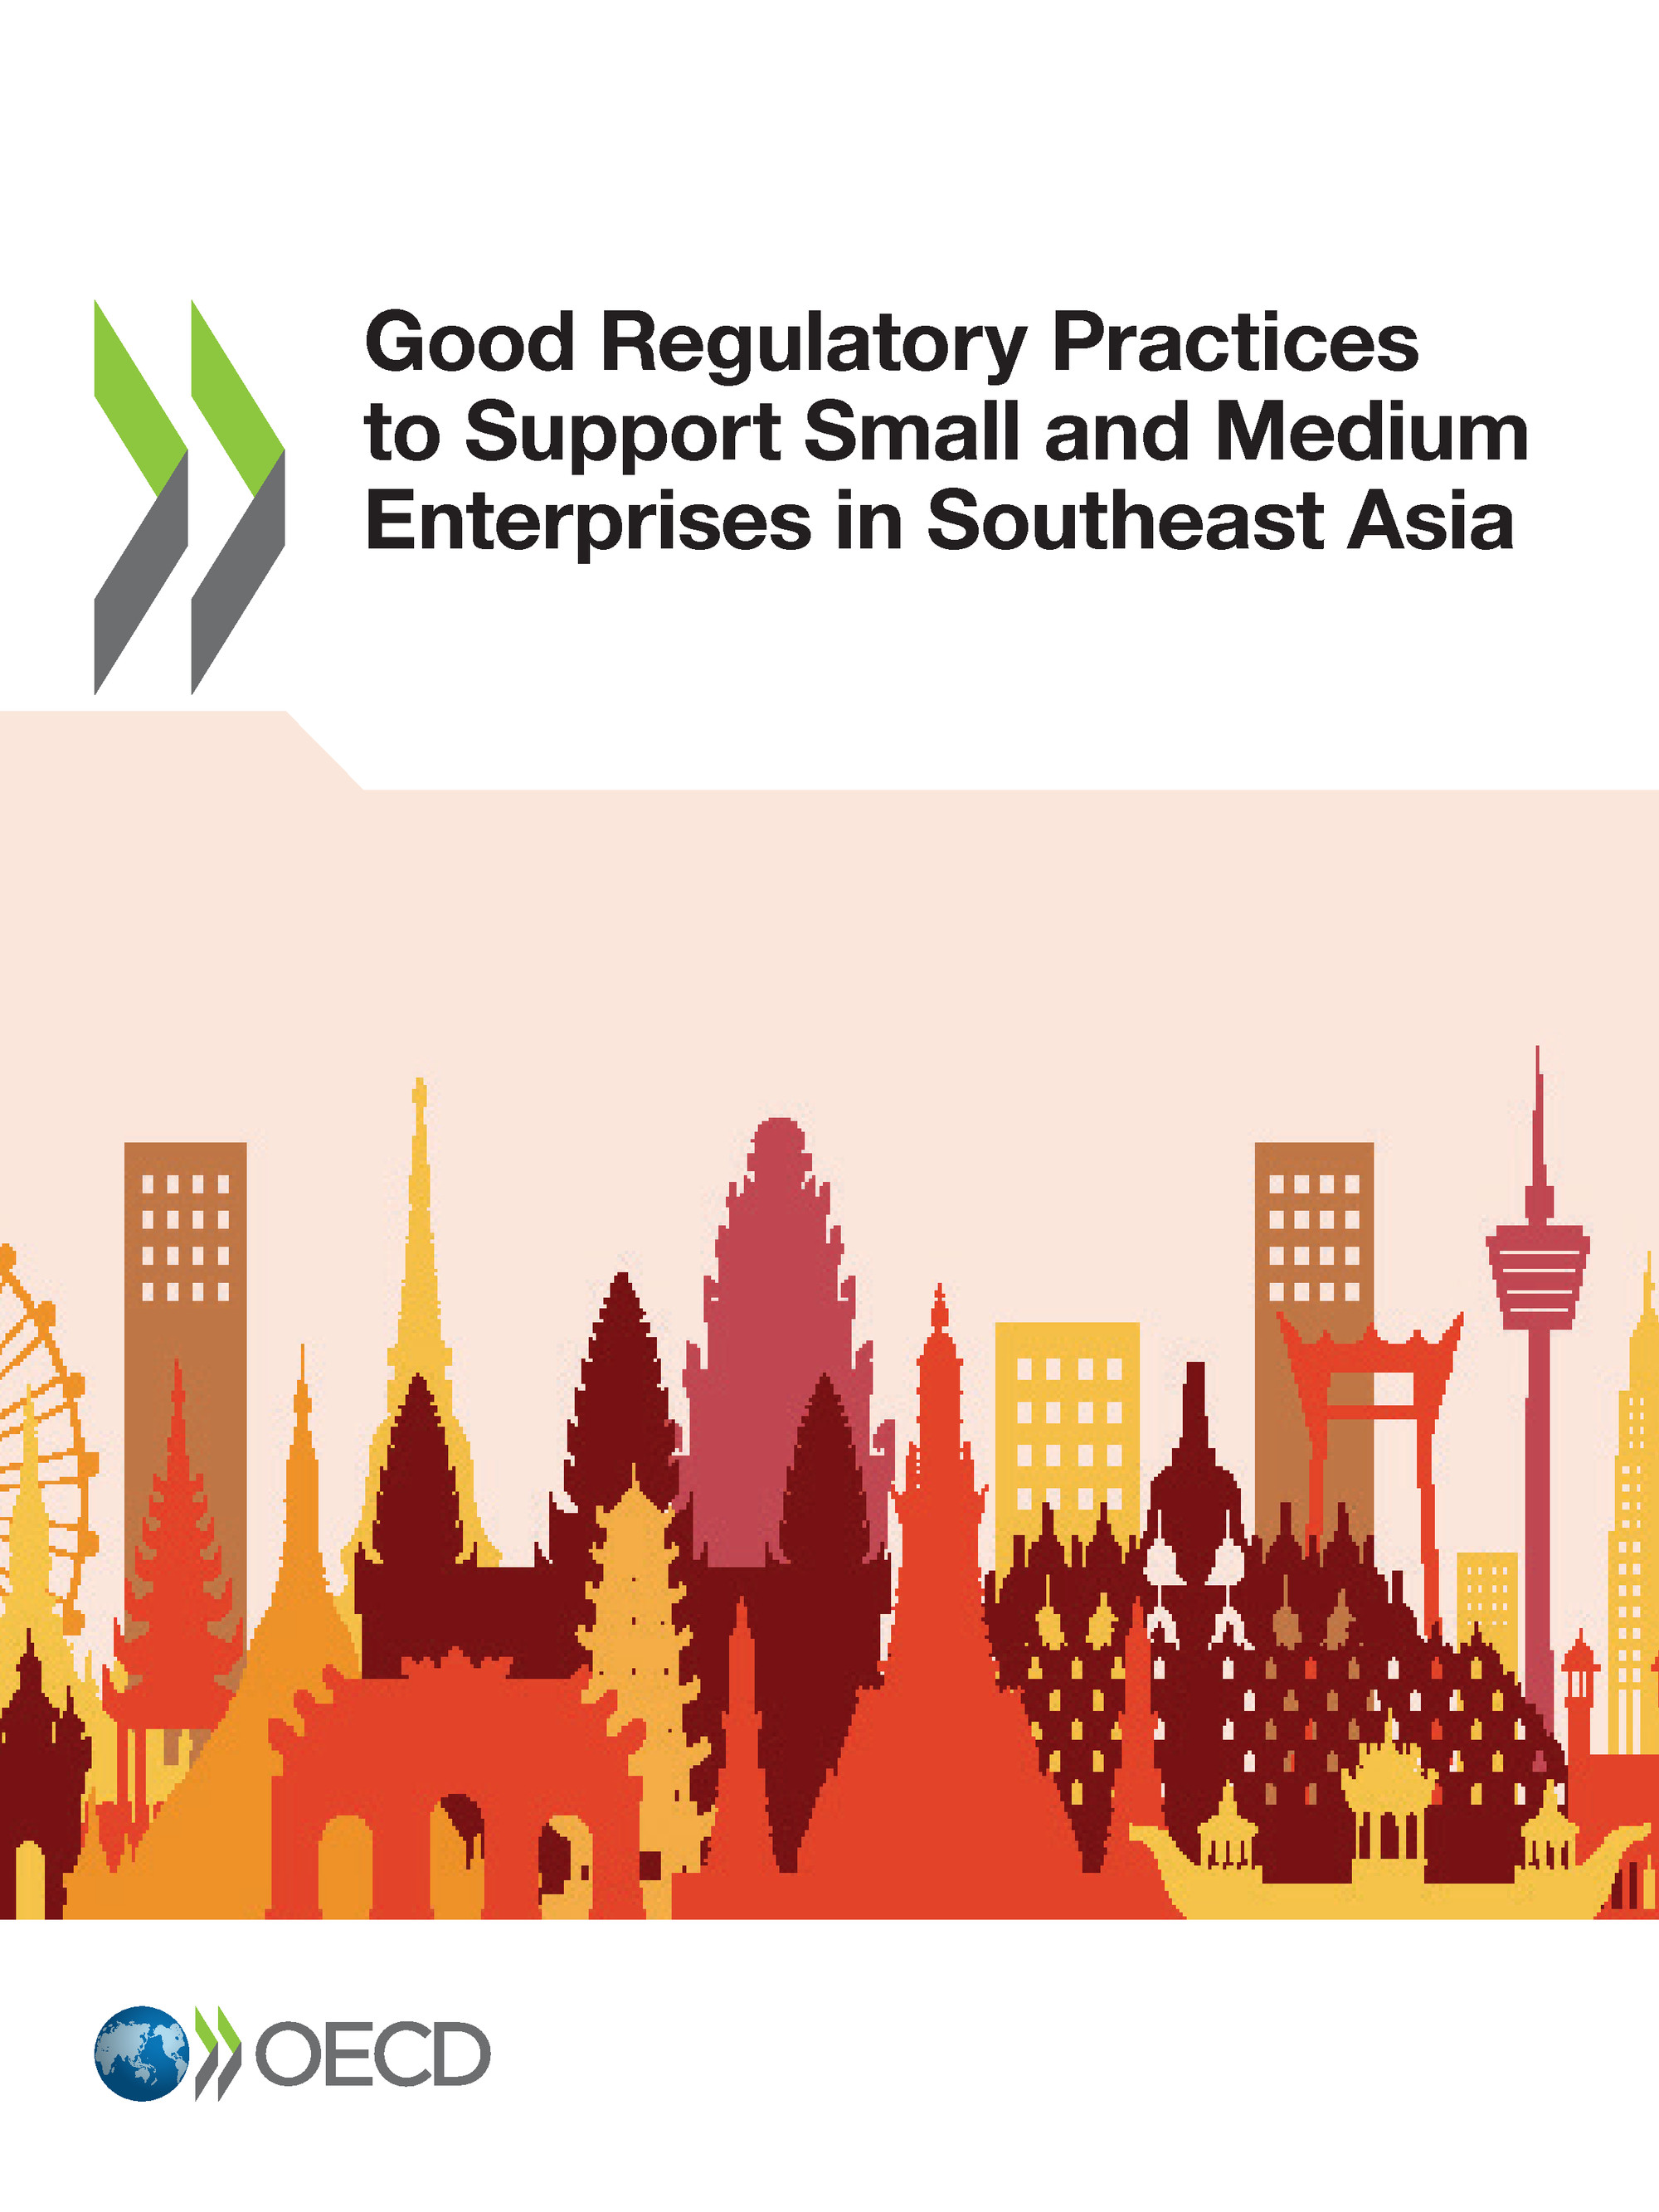 Good Regulatory Practices to Support Small and Medium Enterprises in Southeast Asia -  Collectif - OCDE / OECD